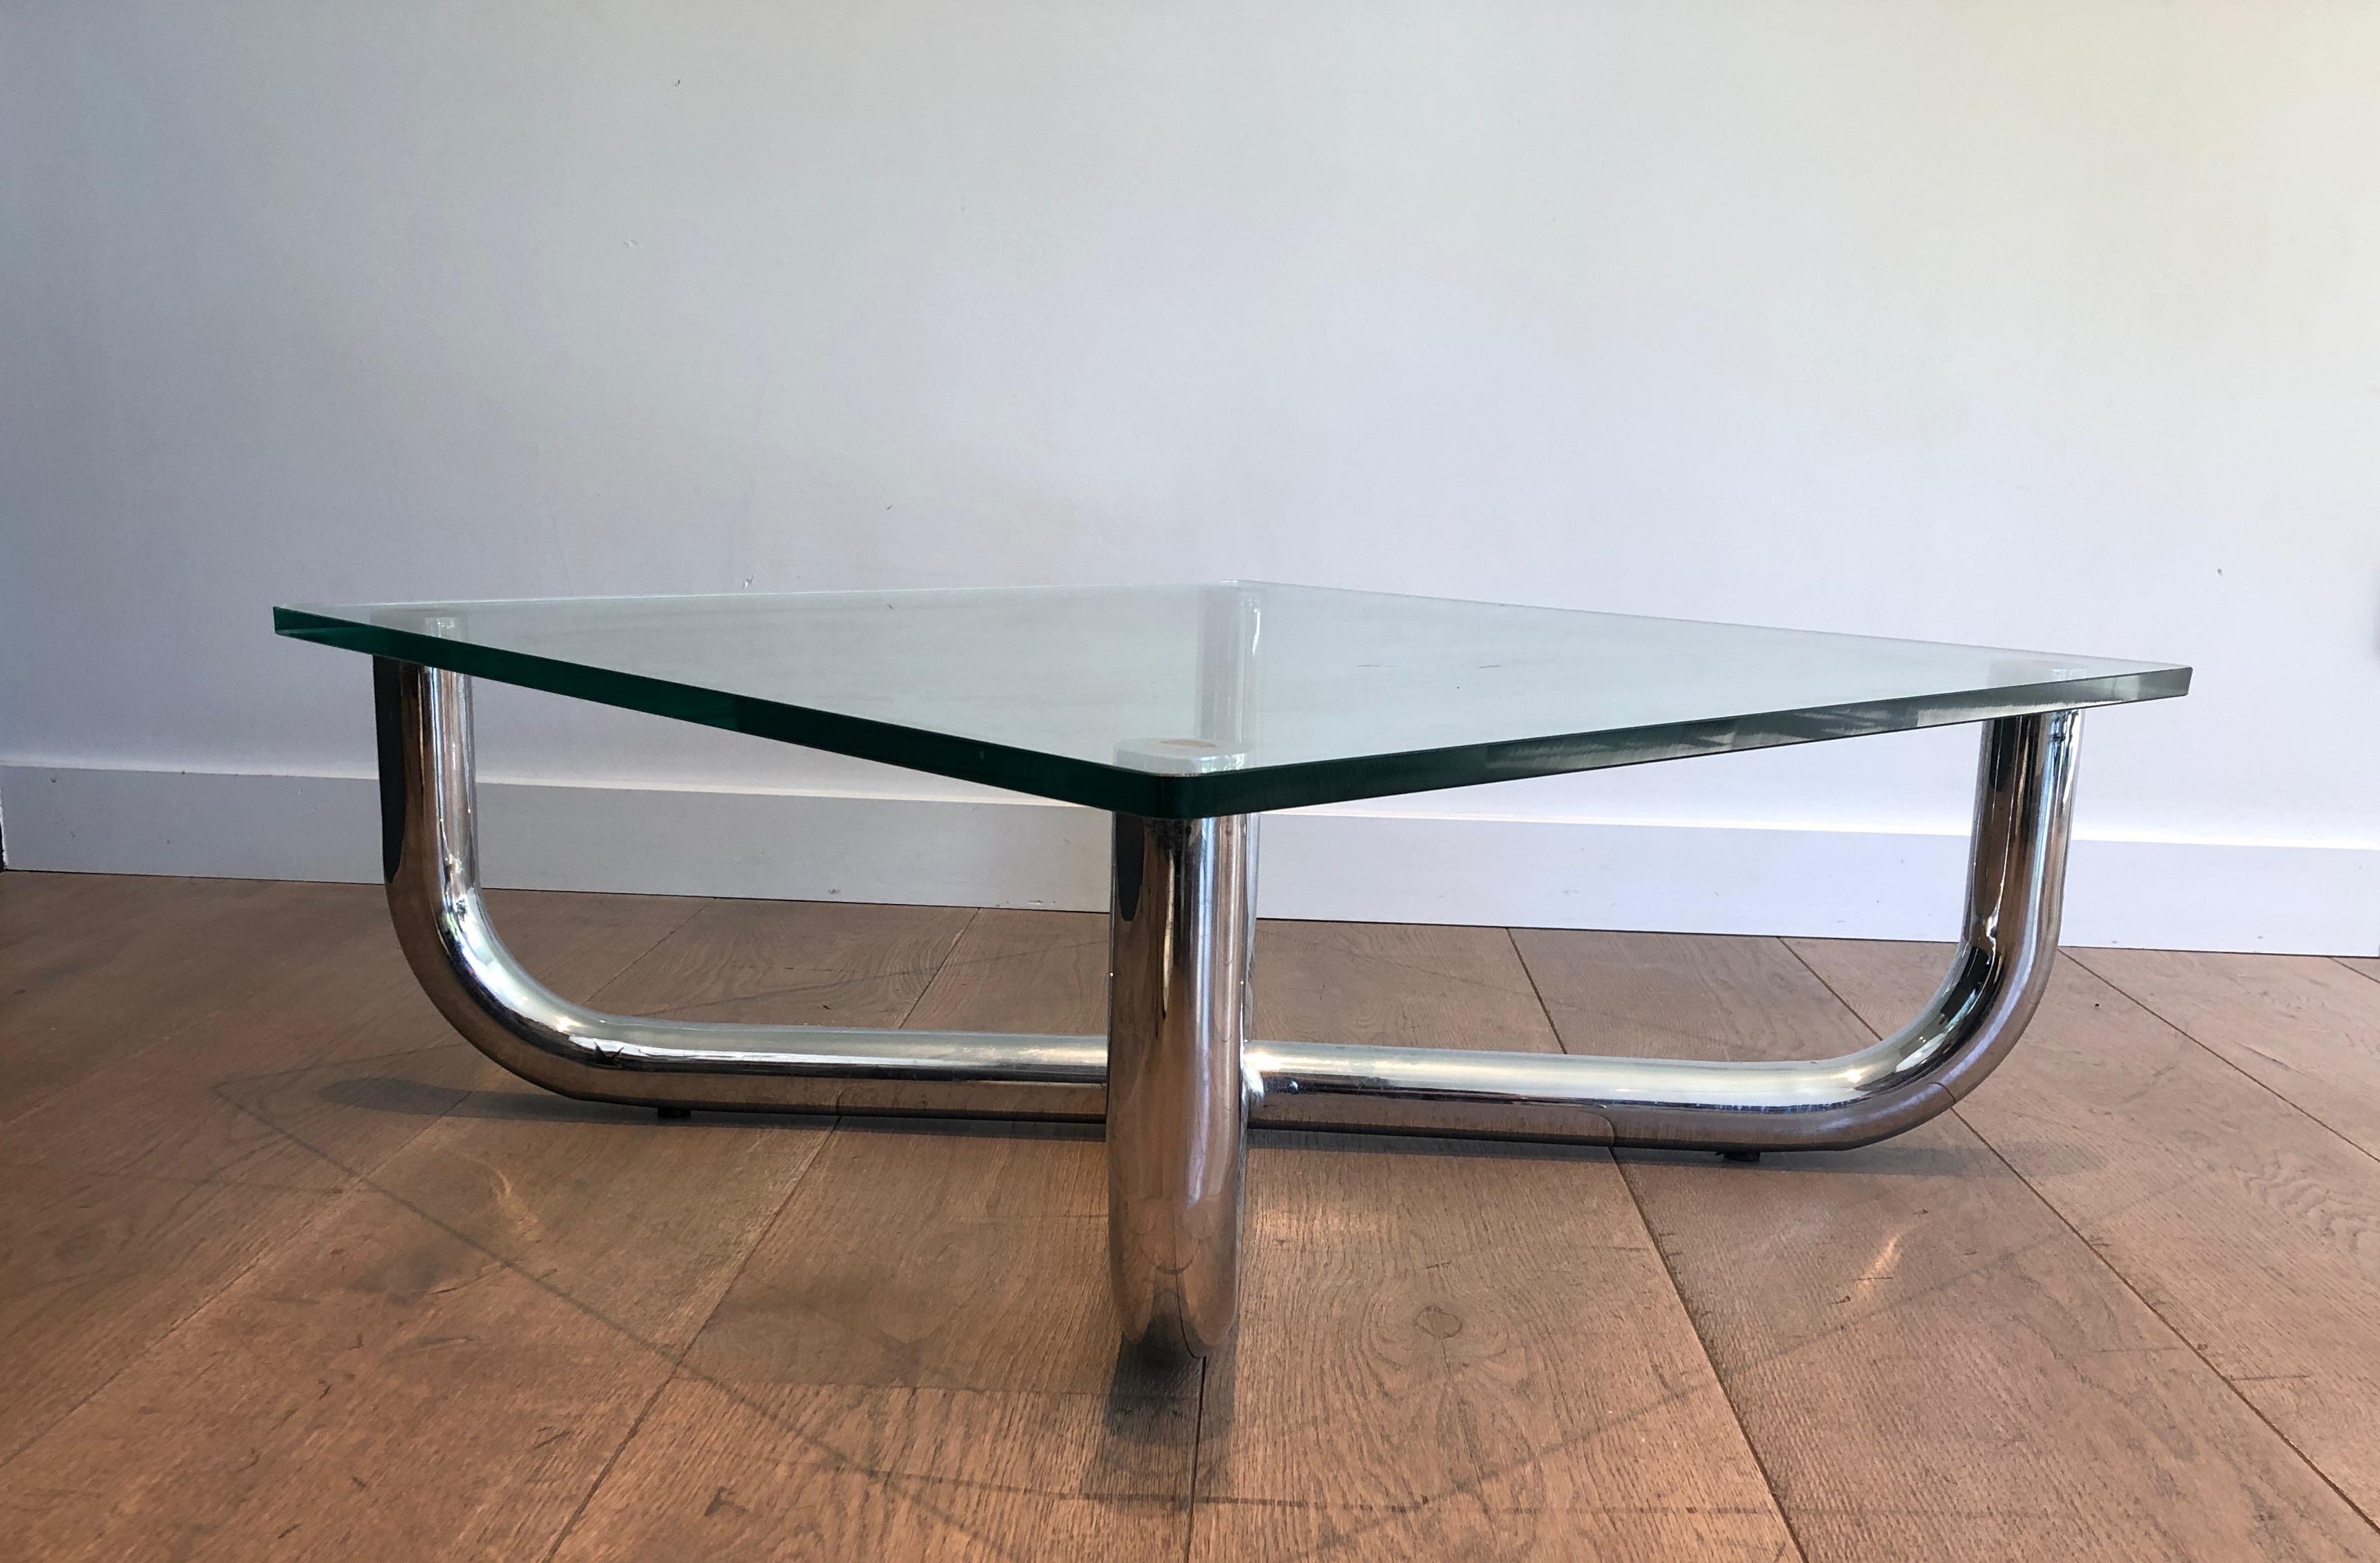 Chromed Coffee Table with Glass Shelf, French Work, Circa 1970 In Good Condition For Sale In Marcq-en-Barœul, Hauts-de-France